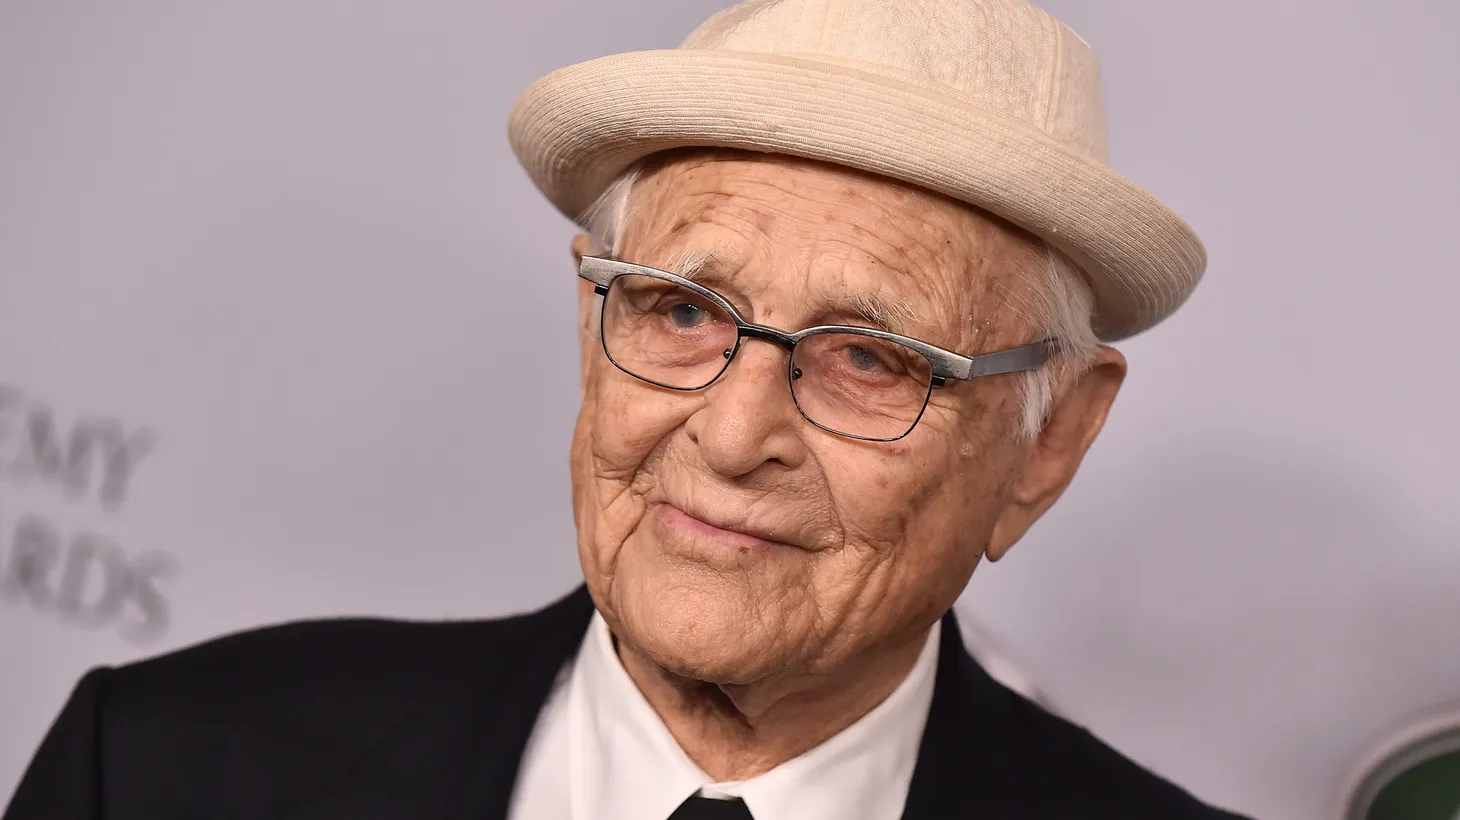 TV writer and producer Norman Lear arrives for the 2019 British Academy Britannia Awards in Beverly Hills, CA on October 25, 2019.